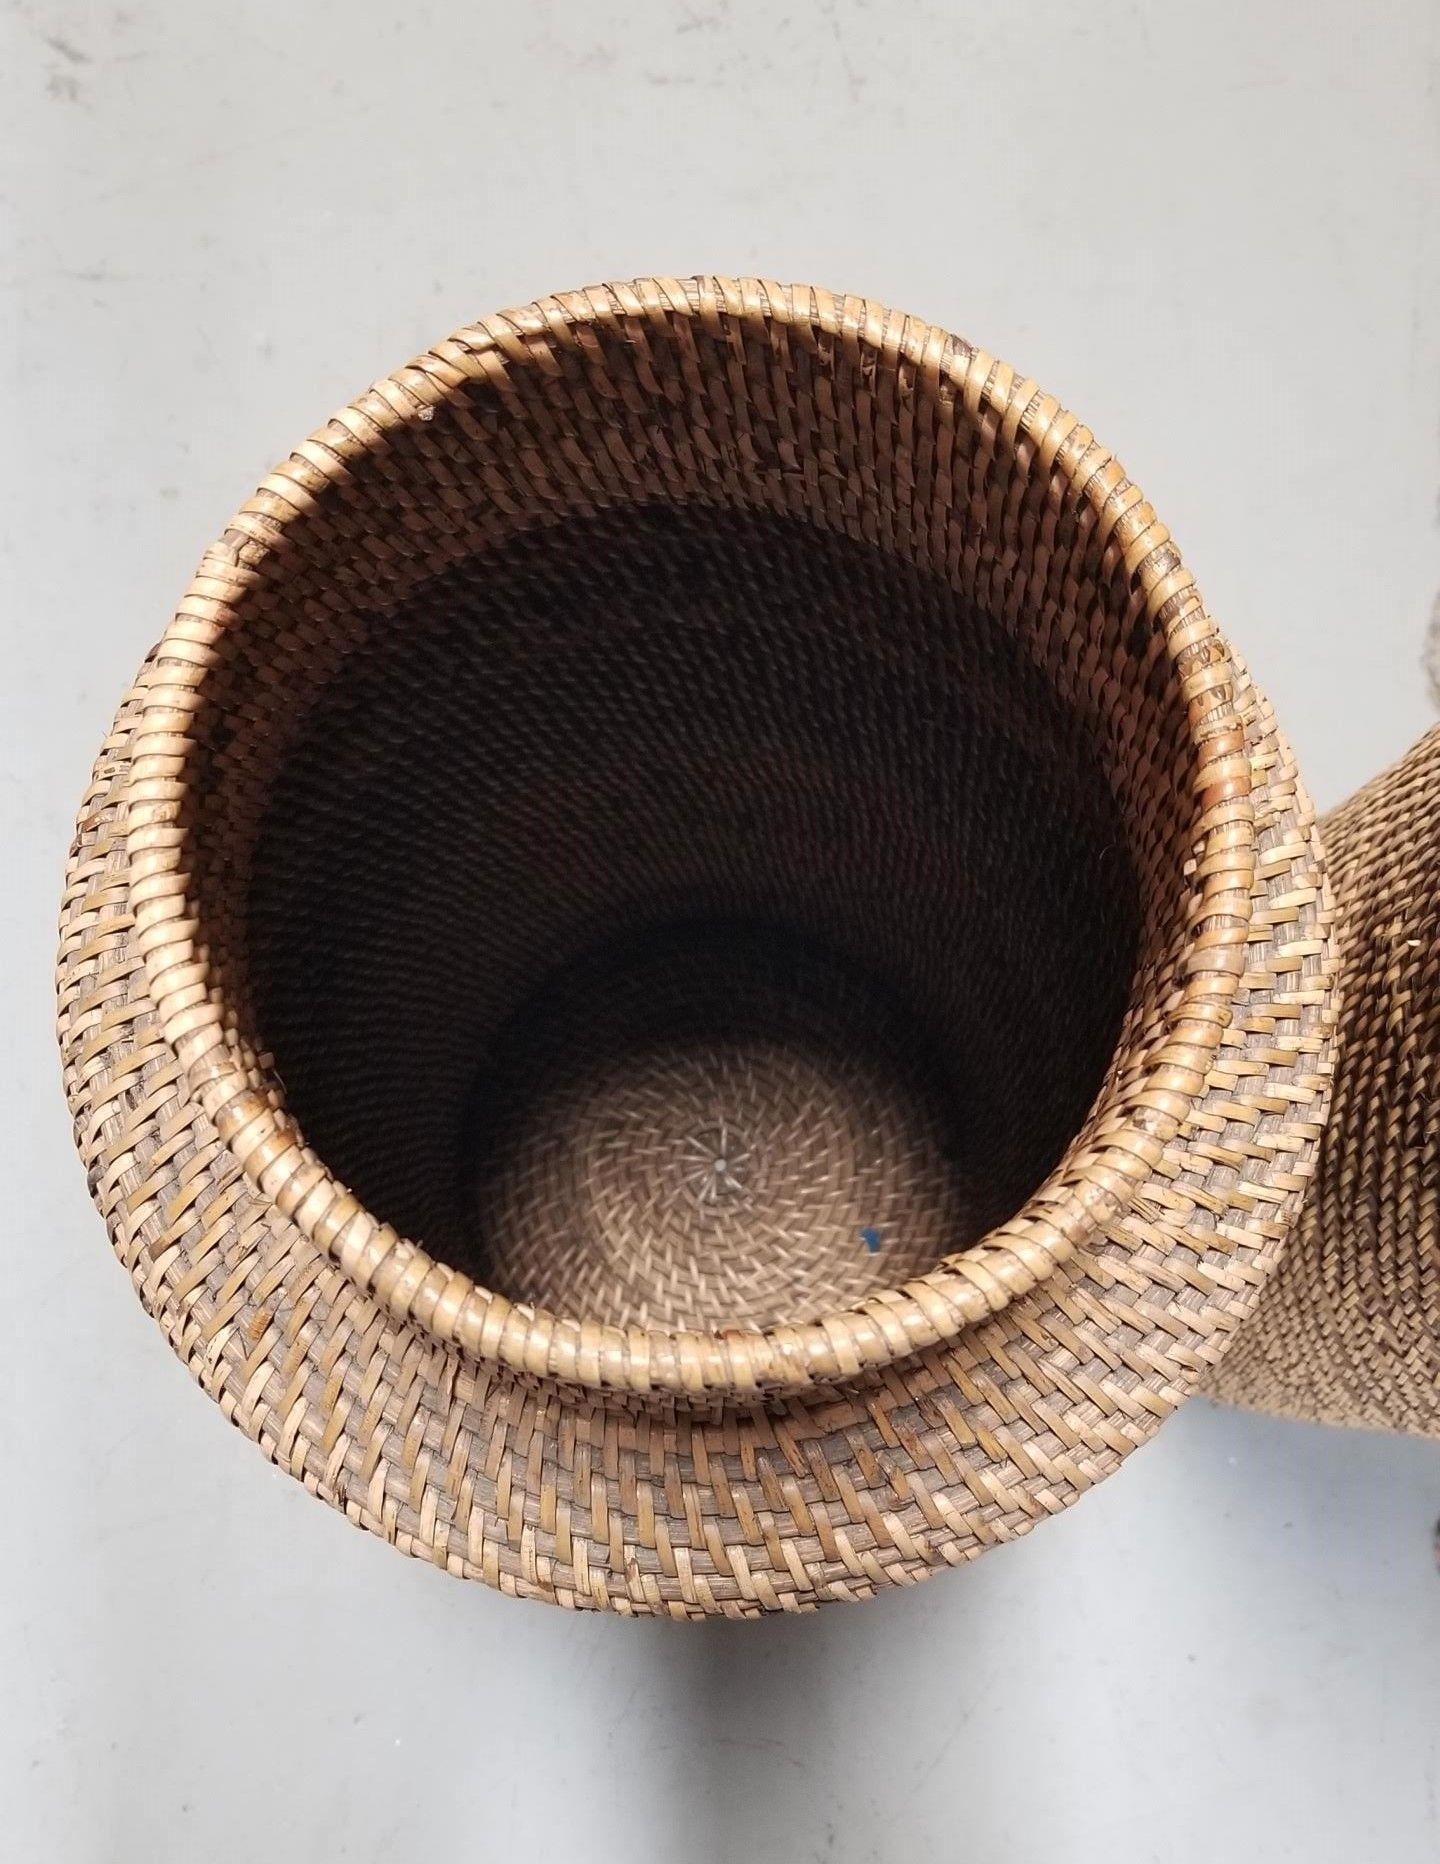 Restored Reed Rattan Wicker Decorative Vases Gabriella Crespi Styled - Pair of 2 In Excellent Condition For Sale In Van Nuys, CA